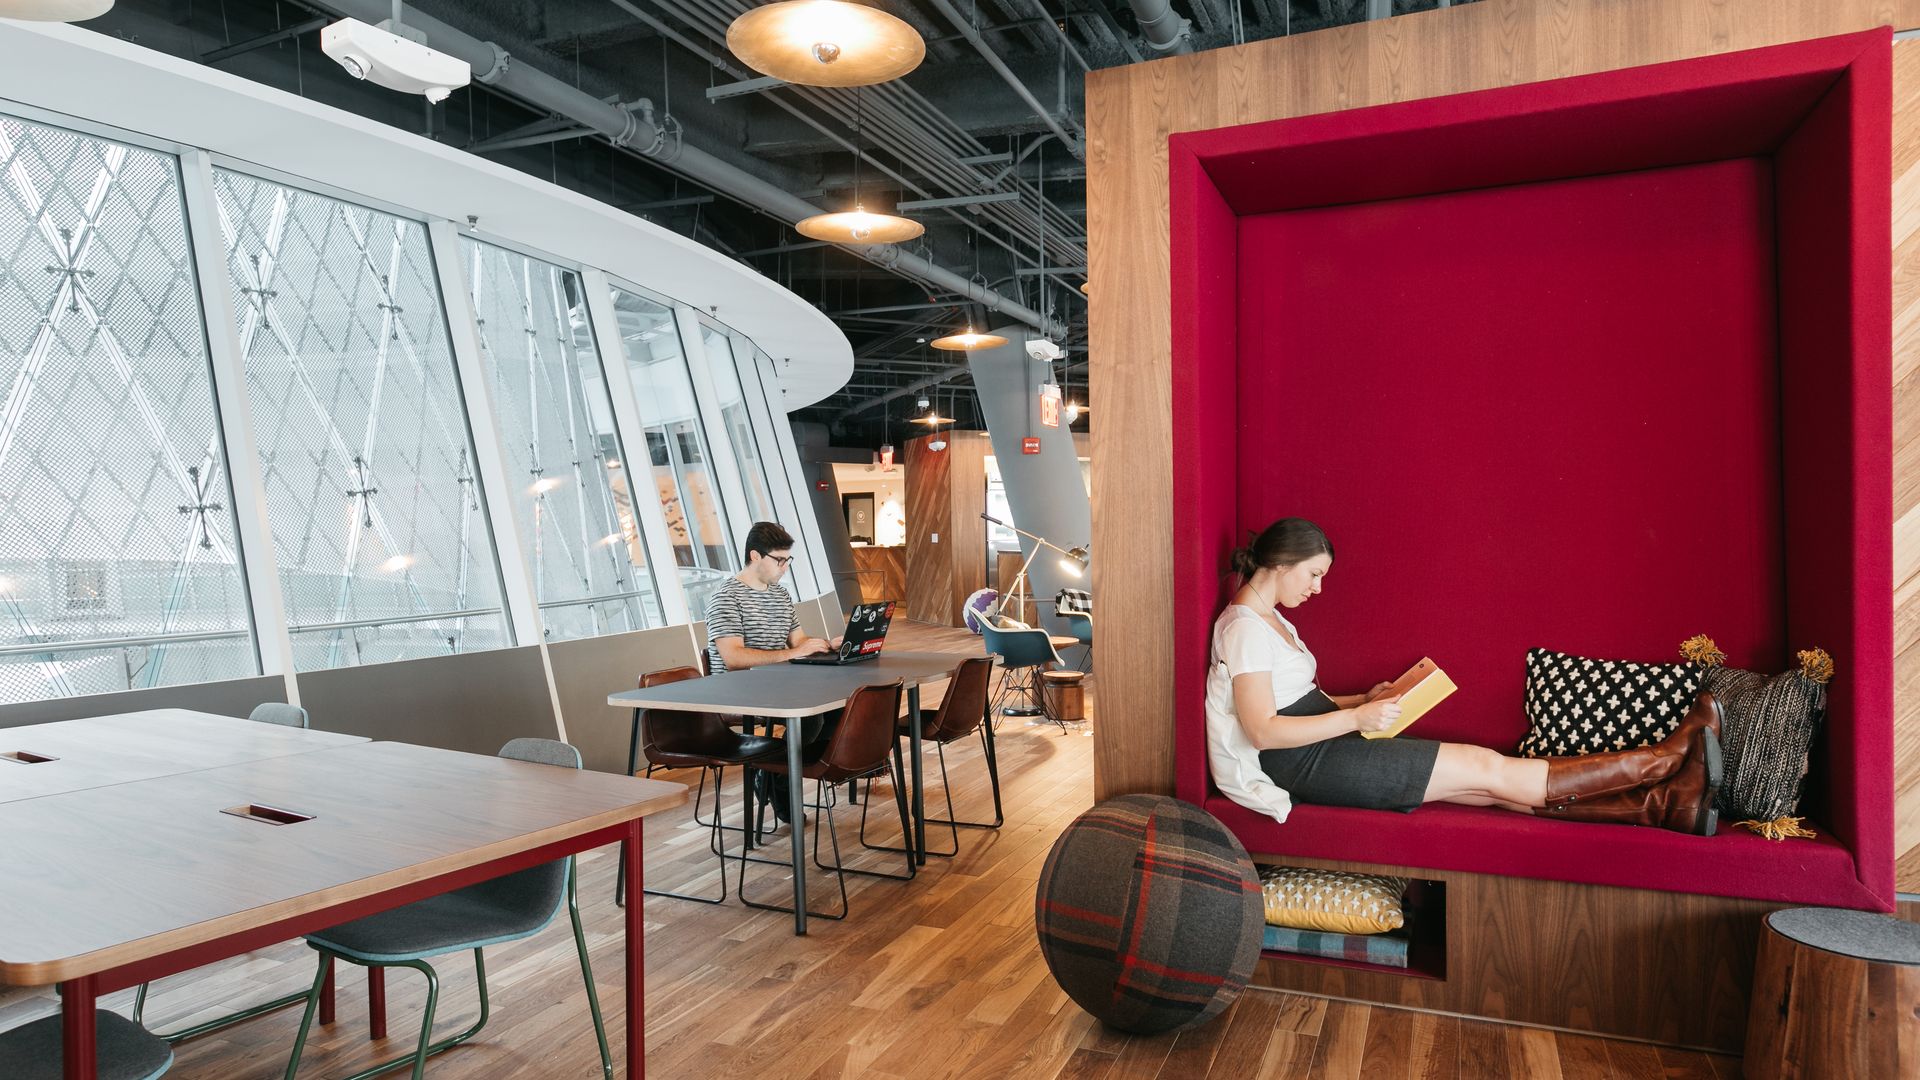 A WeWork co-working spot in New York